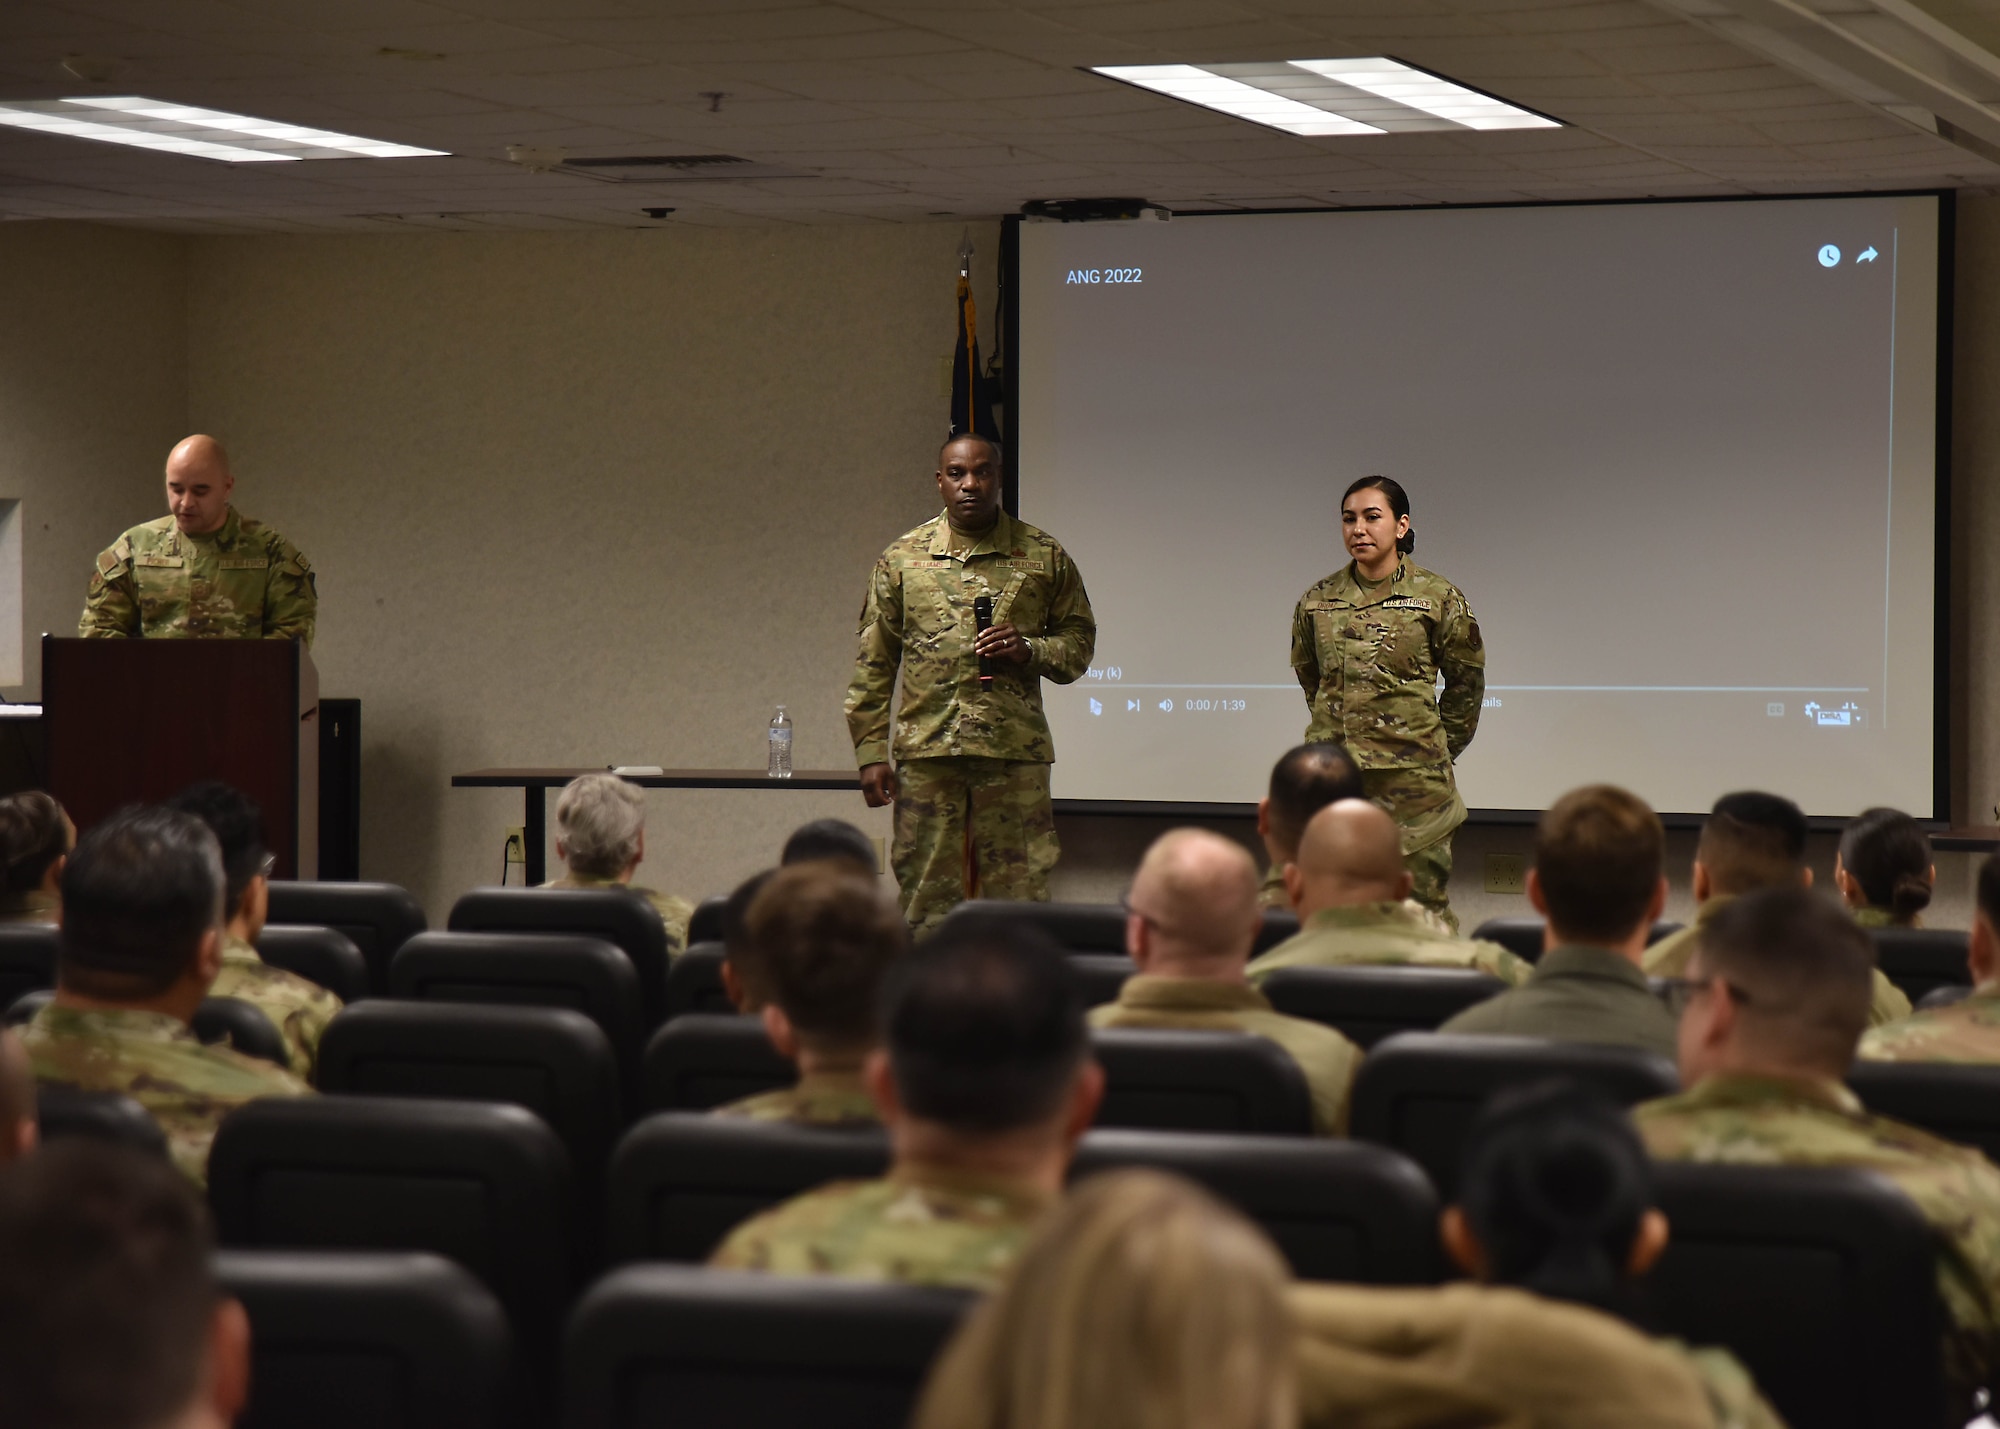 A man and woman wearing green camouflage uniforms stand in front of a room of people, who are also wearing green camouflage uniforms.